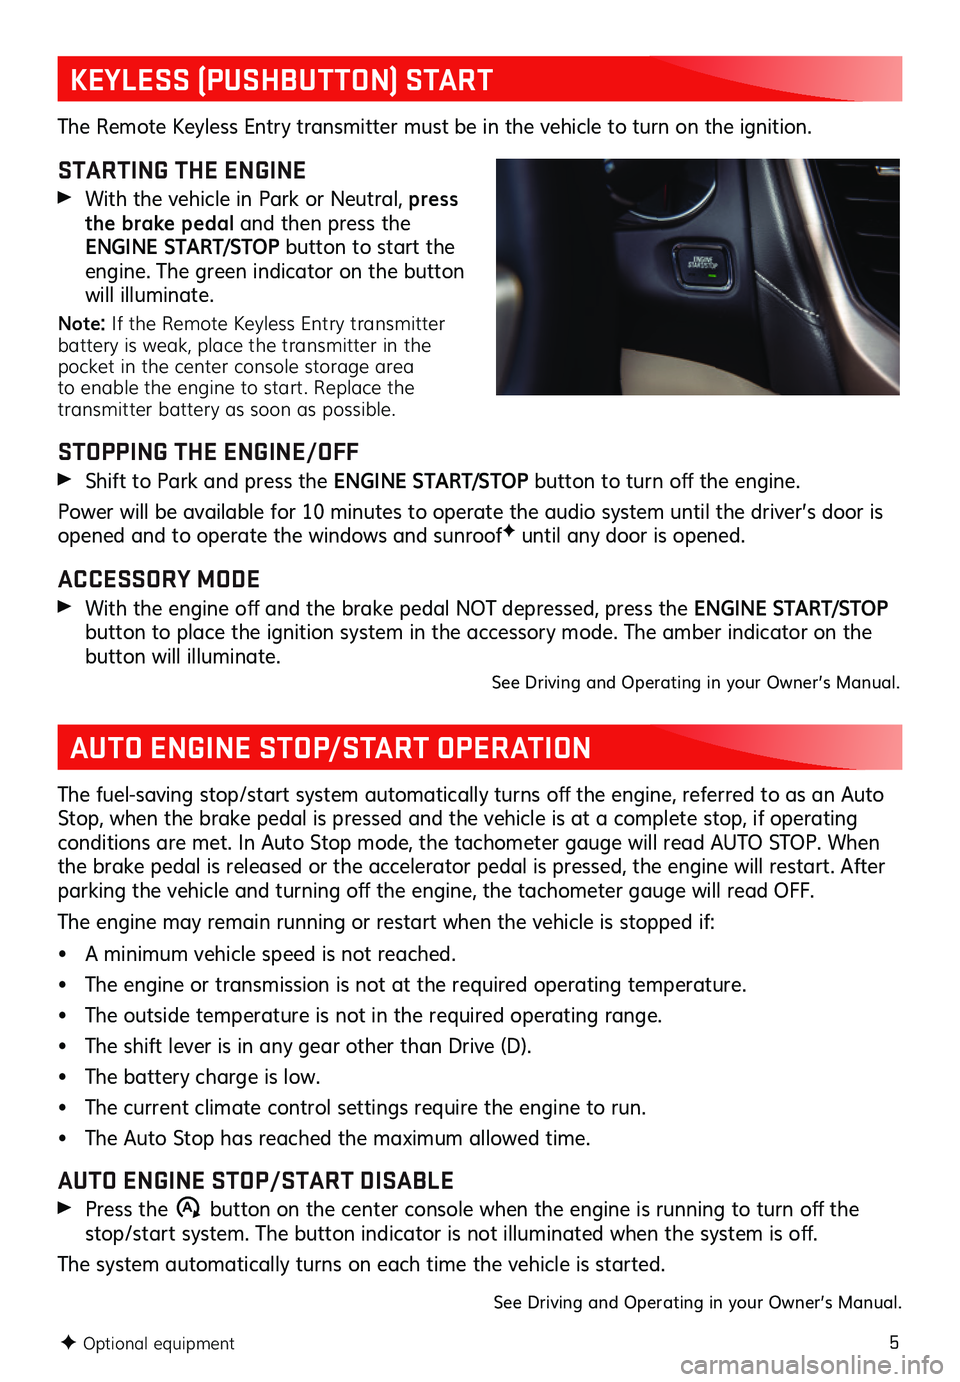 GMC ACADIA 2020  Get To Know Guide 5
KEYLESS (PUSHBUTTON) START
AUTO ENGINE STOP/START OPERATION
The Remote Keyless Entry transmitter must be in the vehicle to turn on the ignition. 
STARTING THE ENGINE 
 With the vehicle in Park or Ne